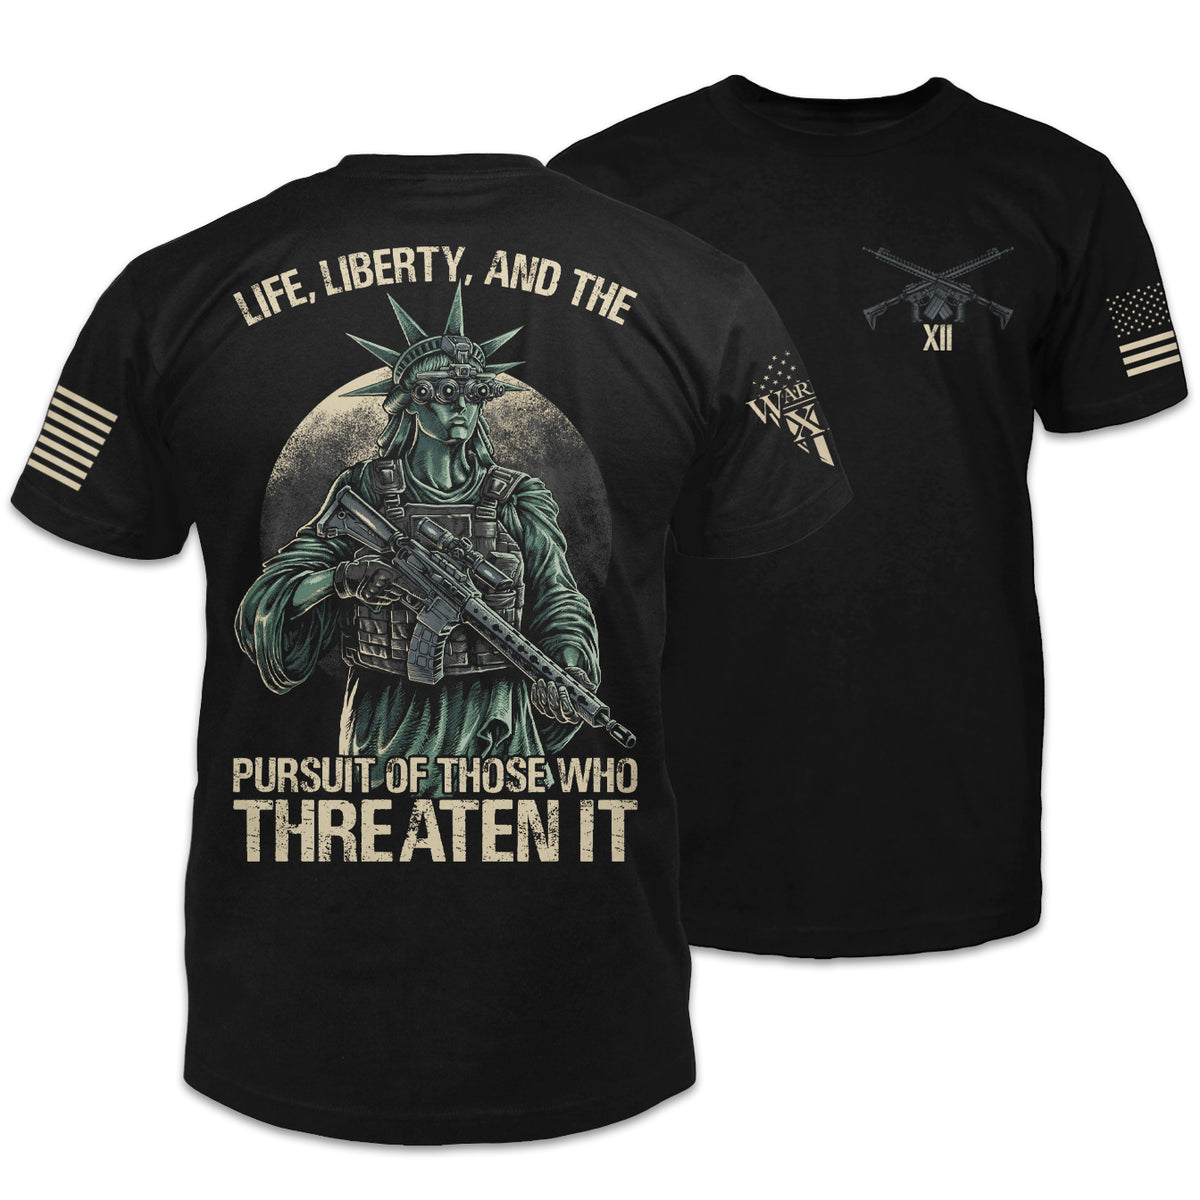 Front and back black t-shirt with the words "Life, liberty, and the pursuit of those who threaten it" with the statue of liberty holding a gun printed on the shirt.